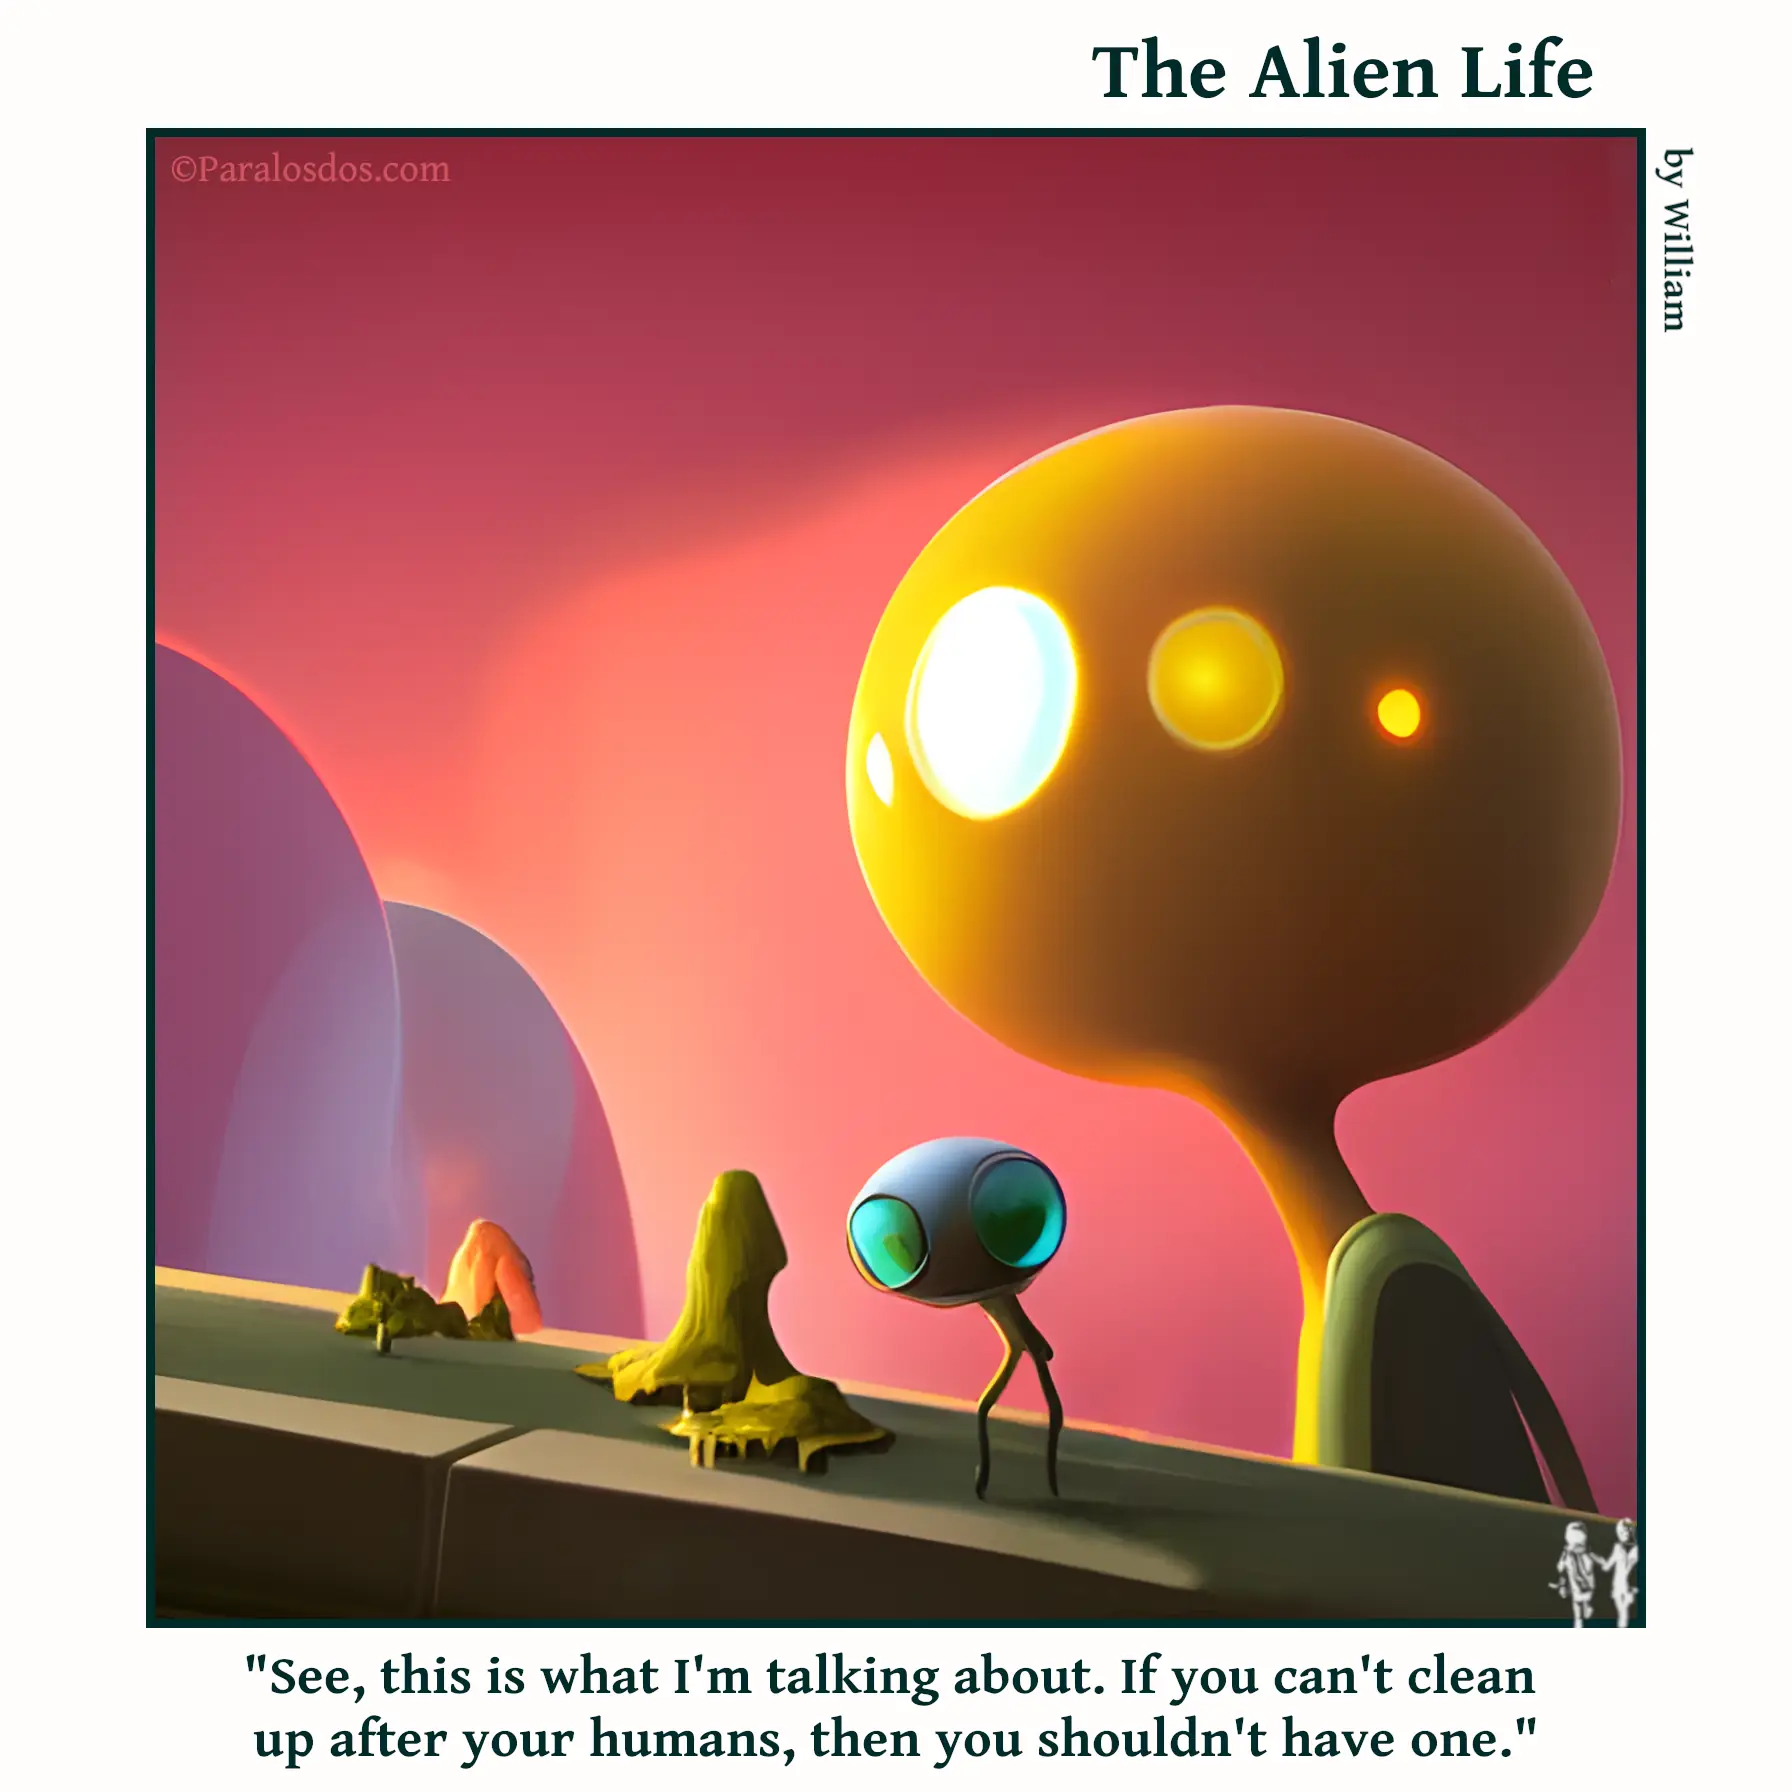 The Alien Life, one panel Comic. Two aliens are looking at litter. The caption reads: "See, this is what I'm talking about. If you can't clean up after your humans, then you shouldn't have one."